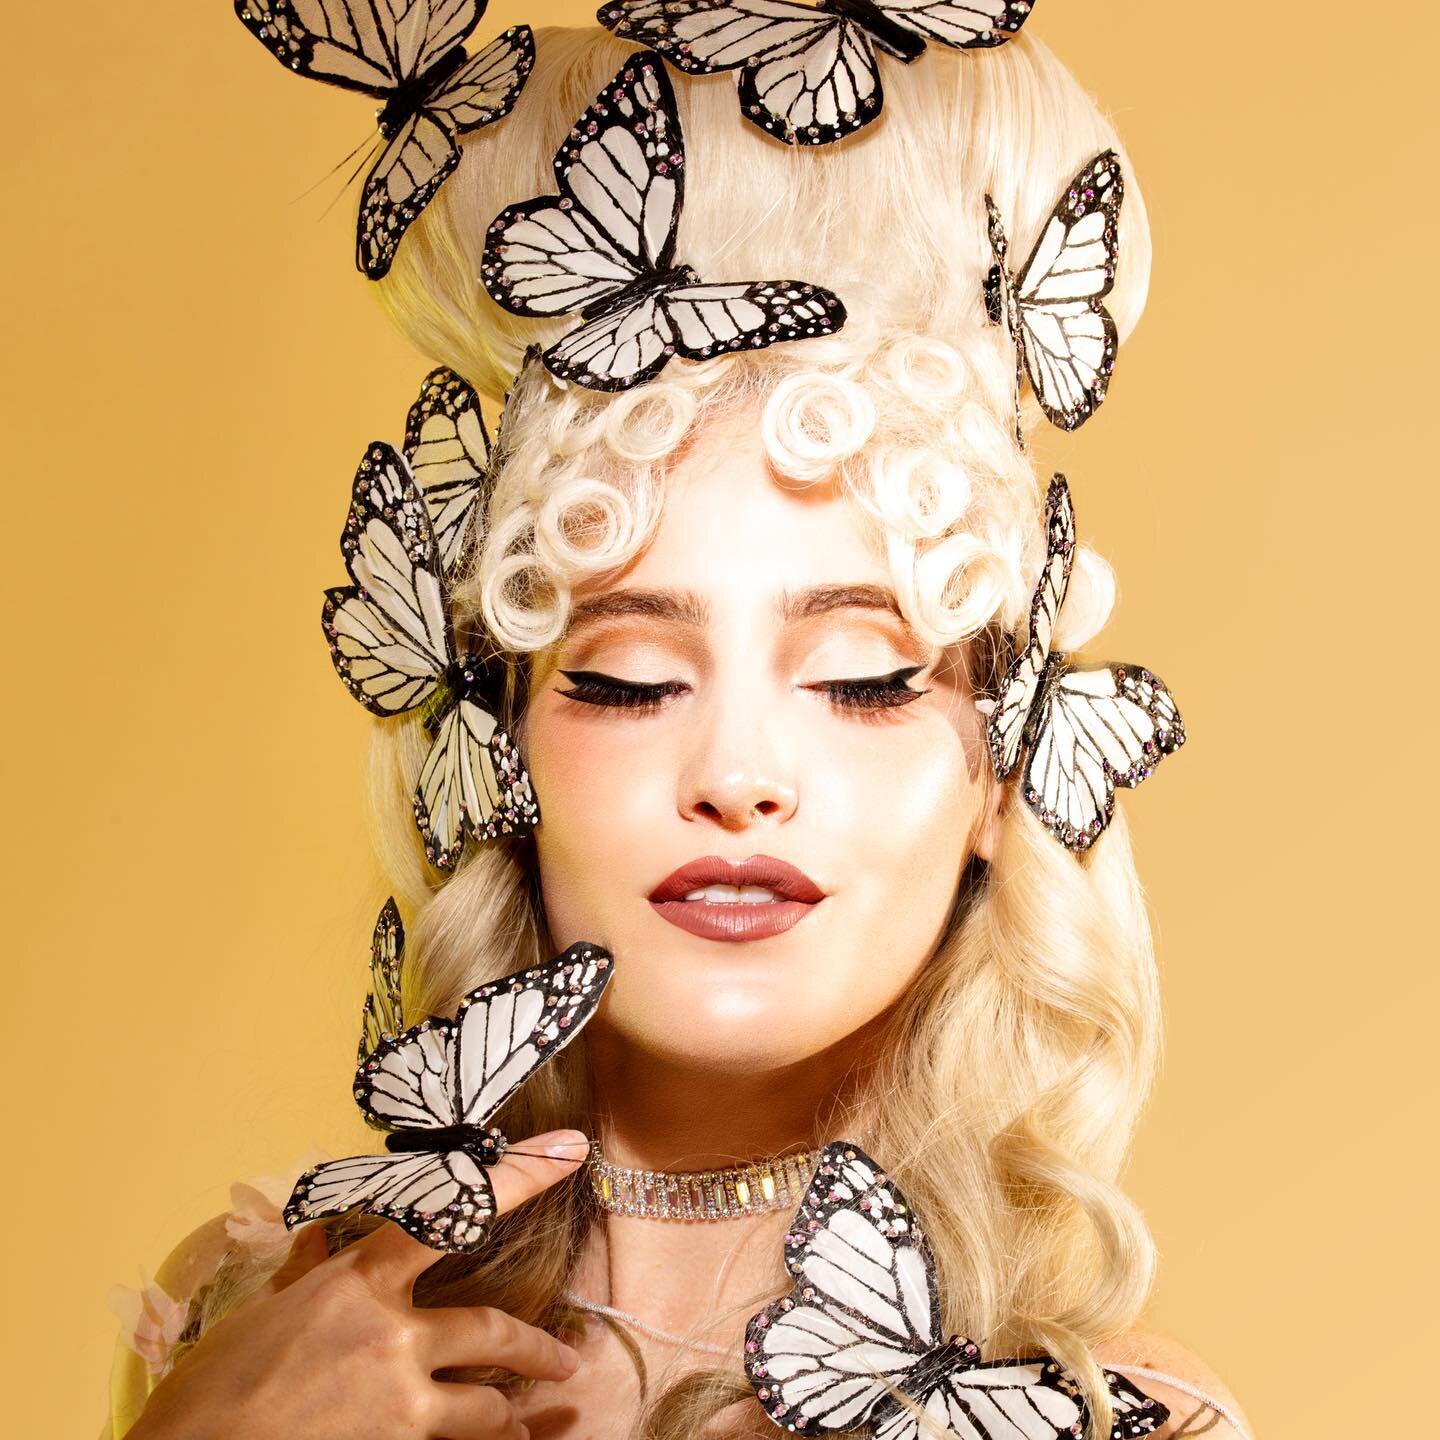 Revisiting one of my fav images by @slowhandphotography 🦋 

#portrait #butterfly #rococco